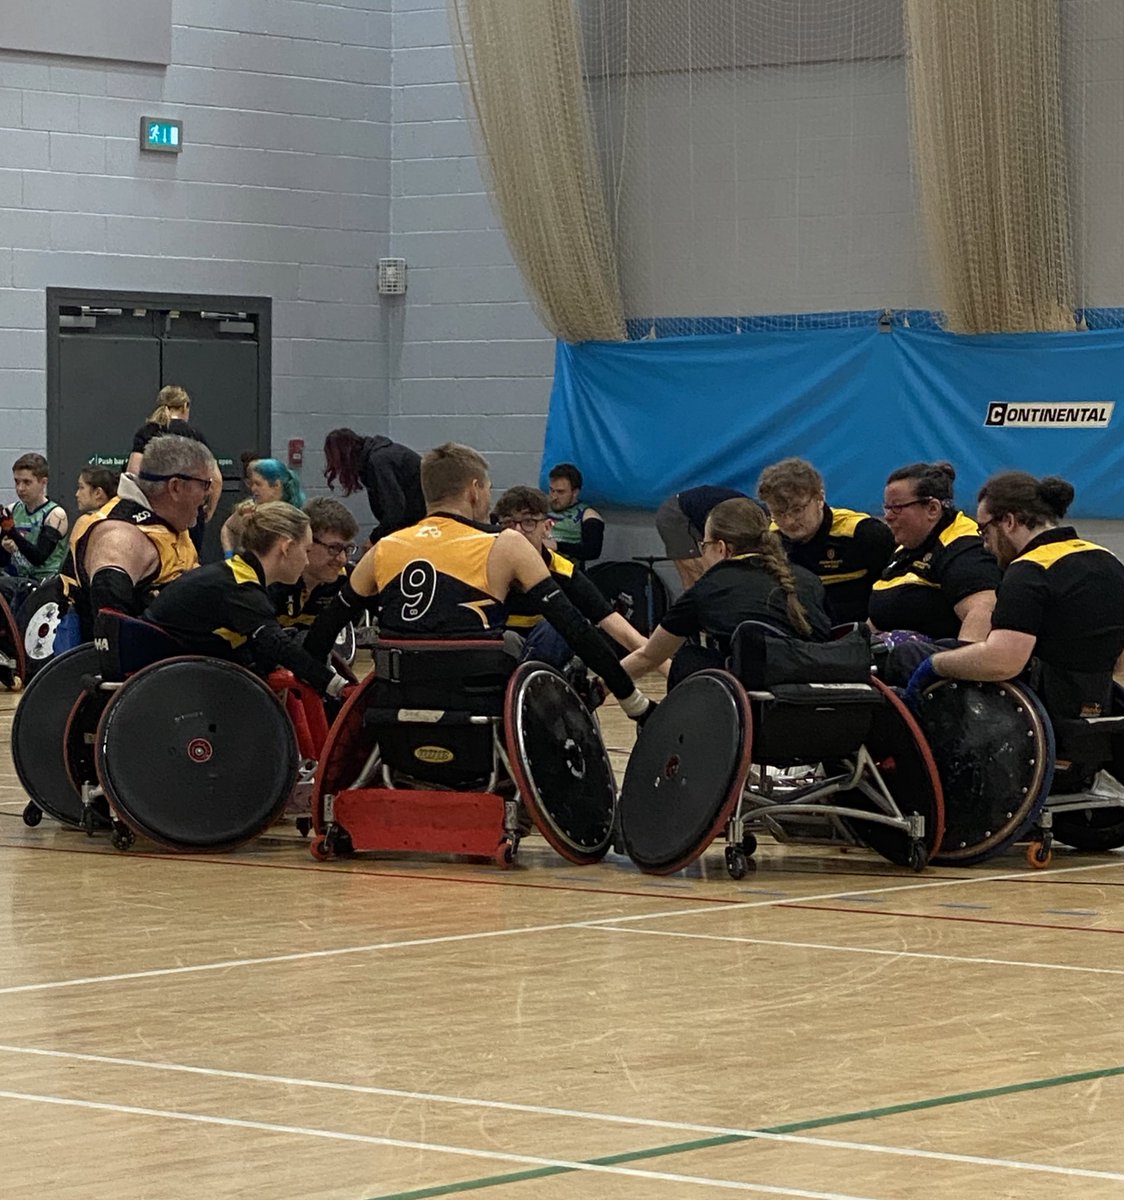 Thank you to all the teams that made the effort to come down to Canterbury leg for of the wheelchair rugby regional league! Fantastic day of good rugby @canterburyhellfire @mandevillewcr @berkshirebansheeswrc @brightonbuccs